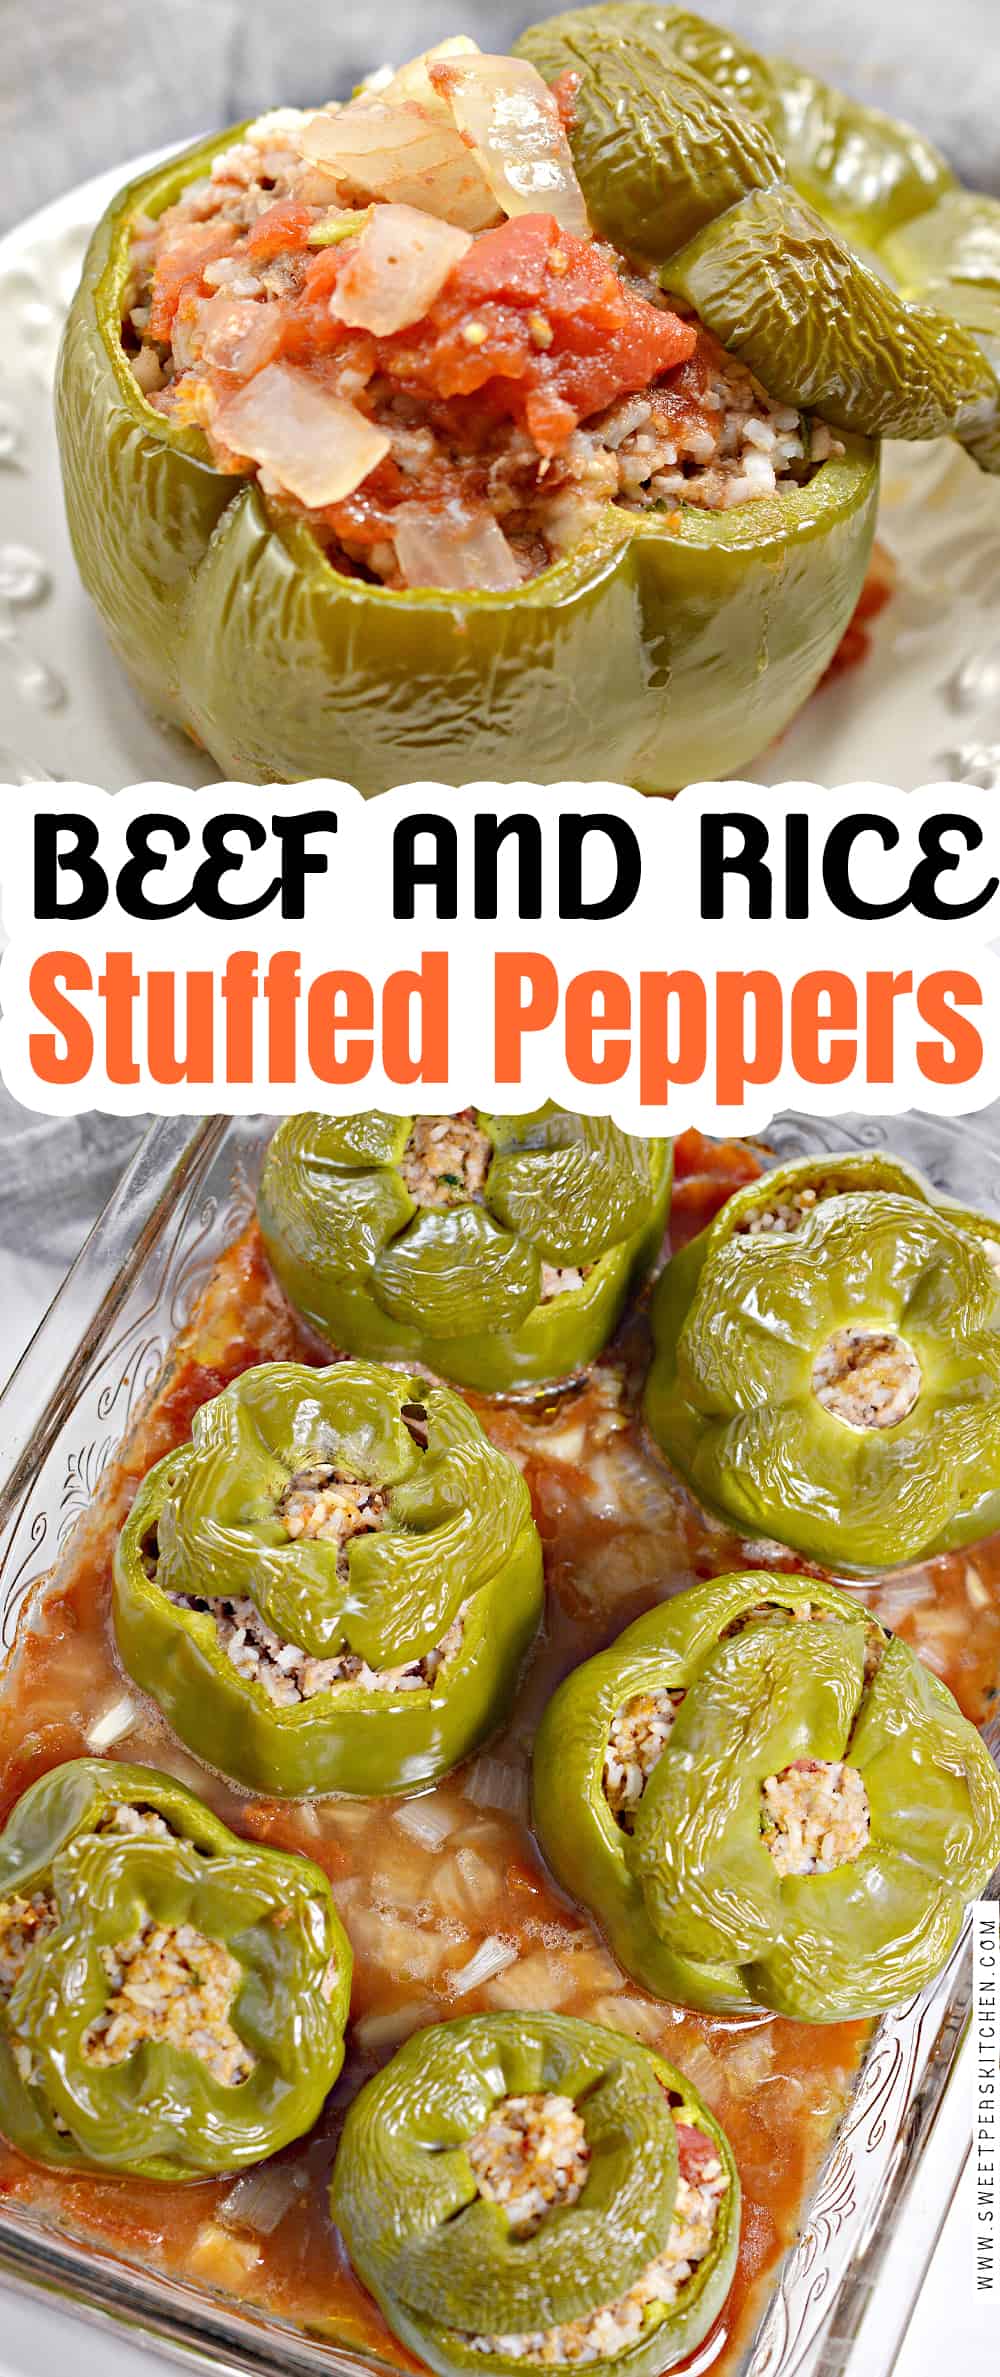 Beef and Rice Stuffed Peppers - Sweet Pea's Kitchen